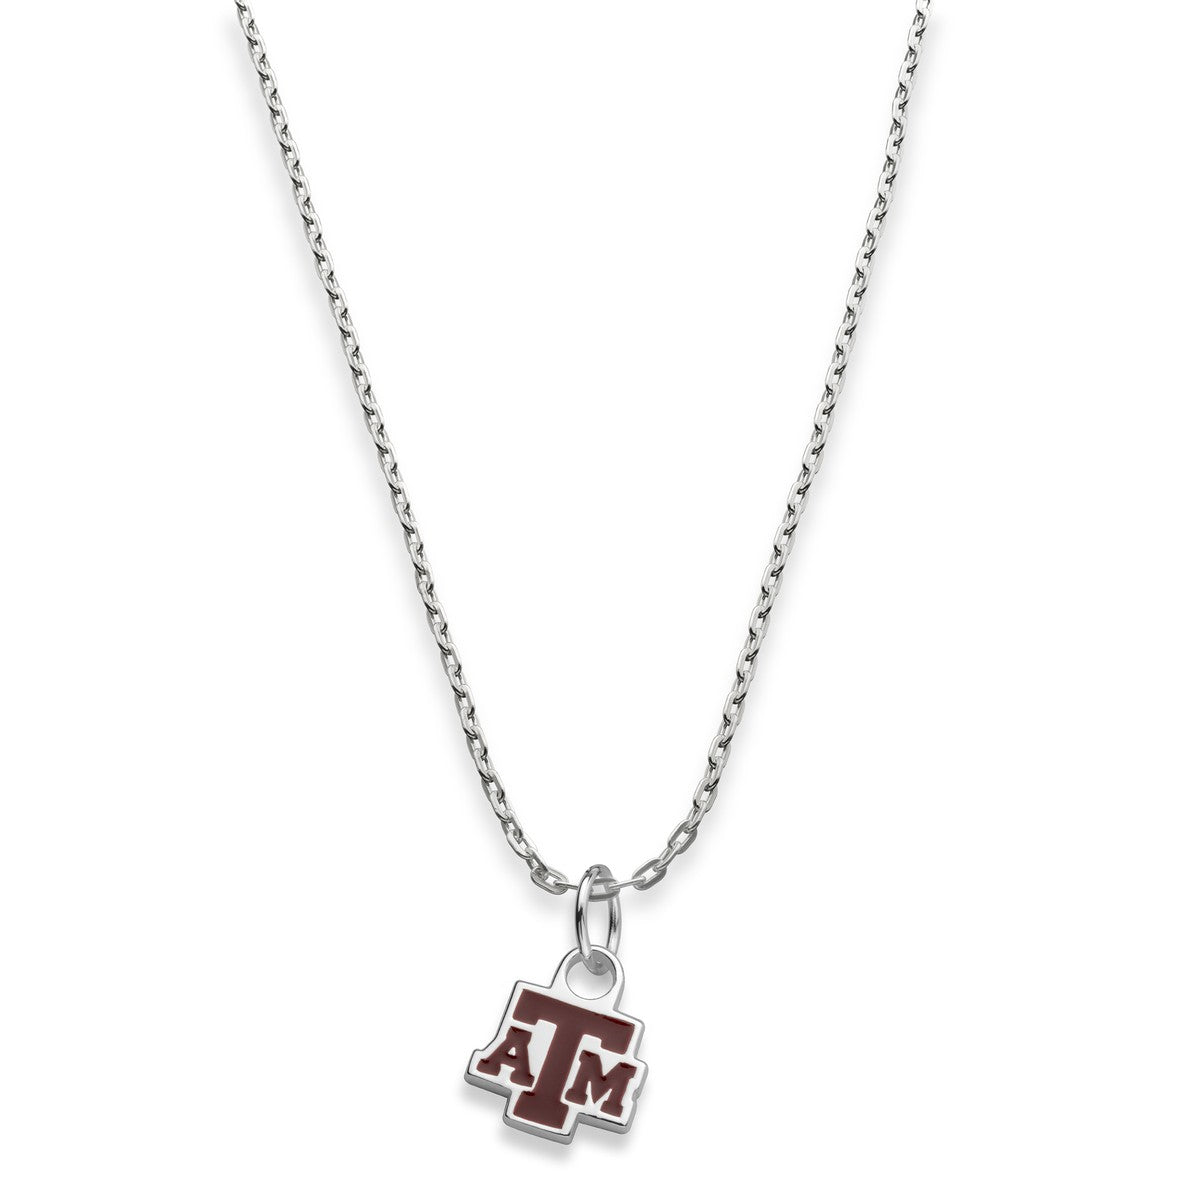 Texas A&M Jewelry - Charms, Bracelets, Necklaces. Personalized | M.LaHart &  Co.